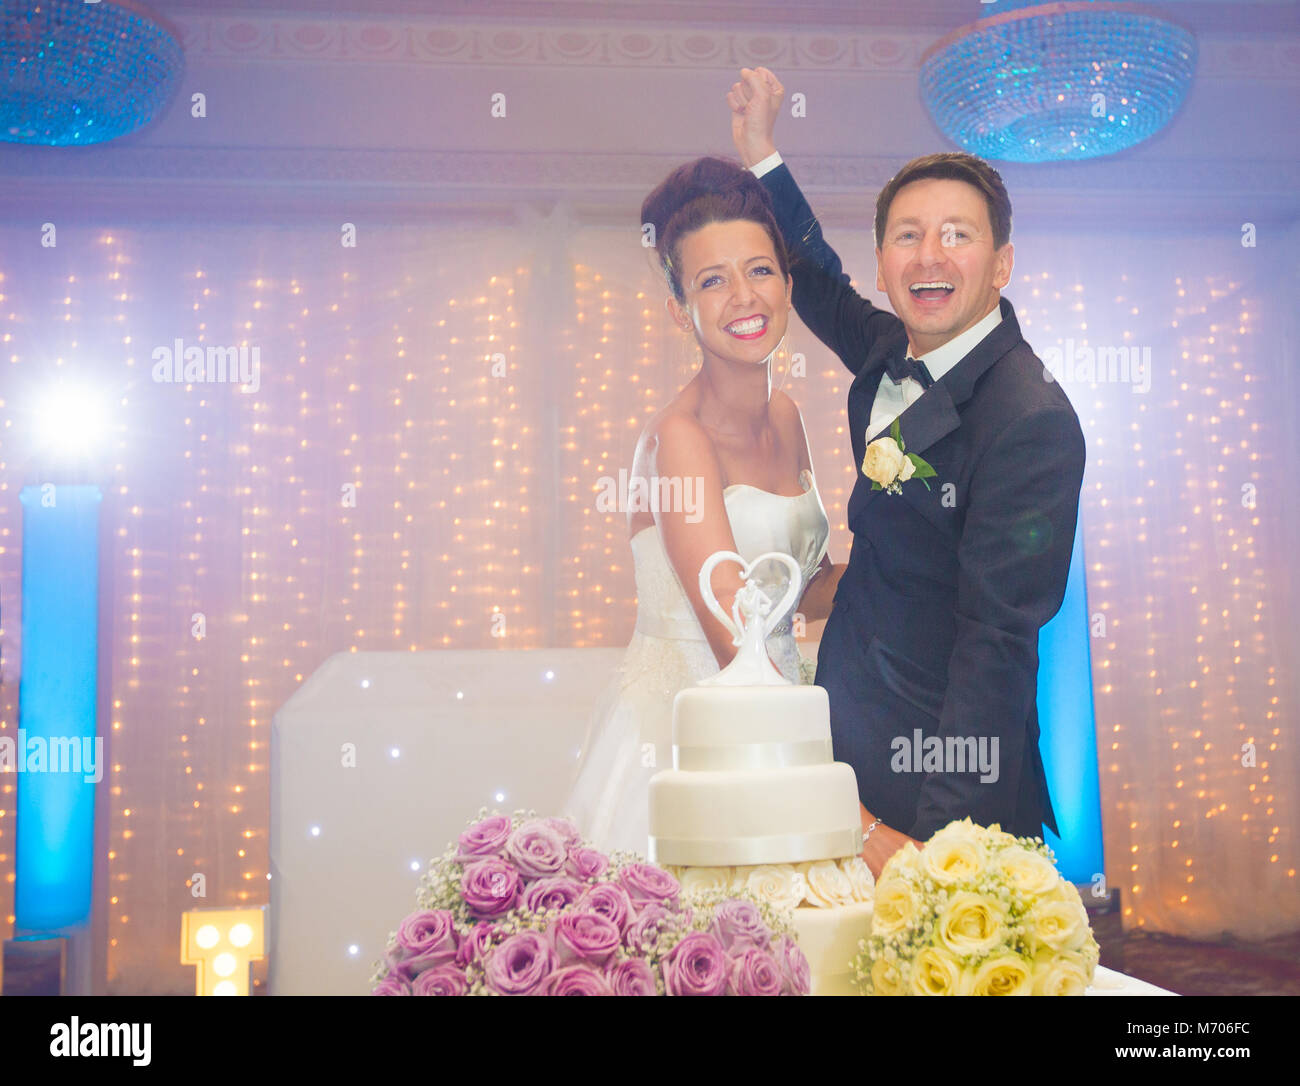 Smiling bride and groom cutting wedding cake on their wedding day Stock Photo